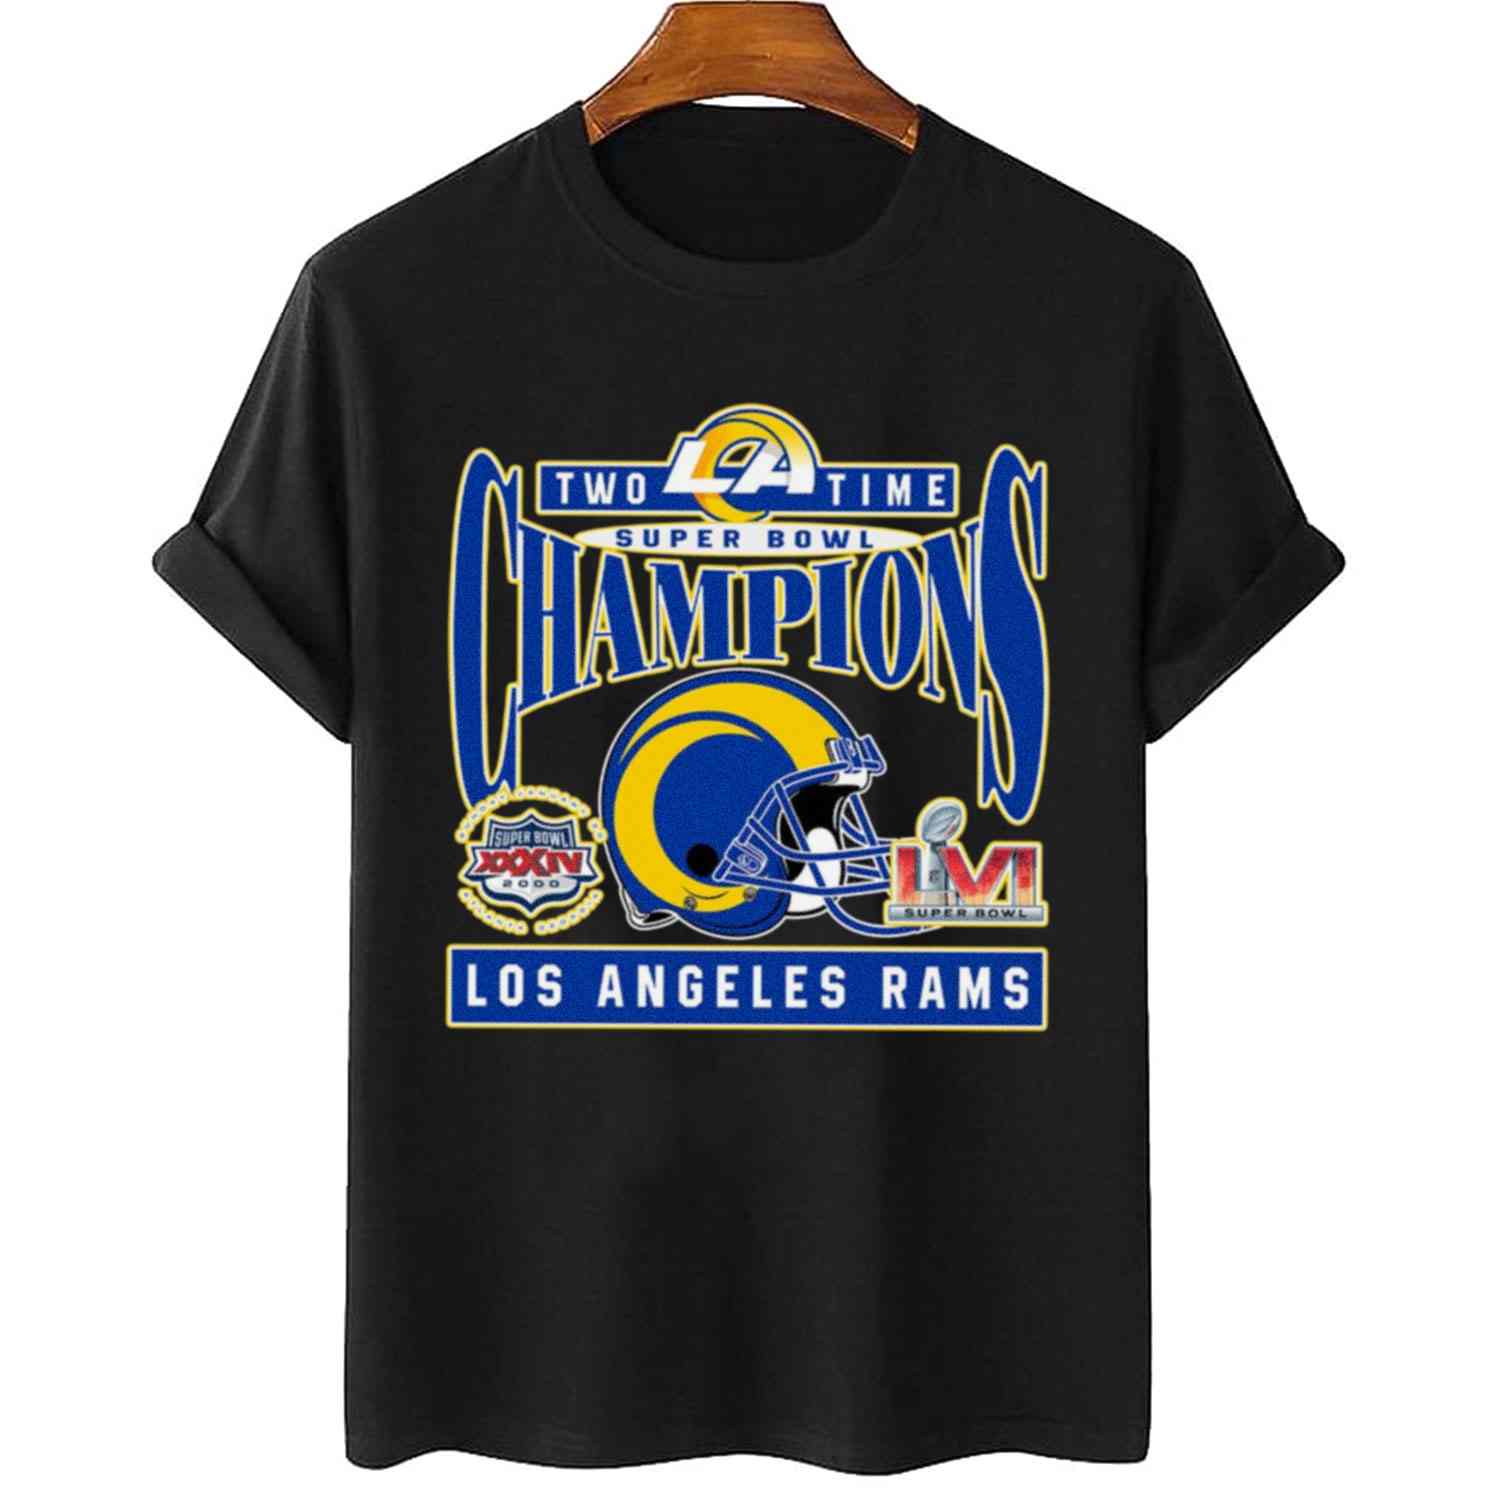 Two Time Super Bowl Champions Los Angeles Rams T-Shirt